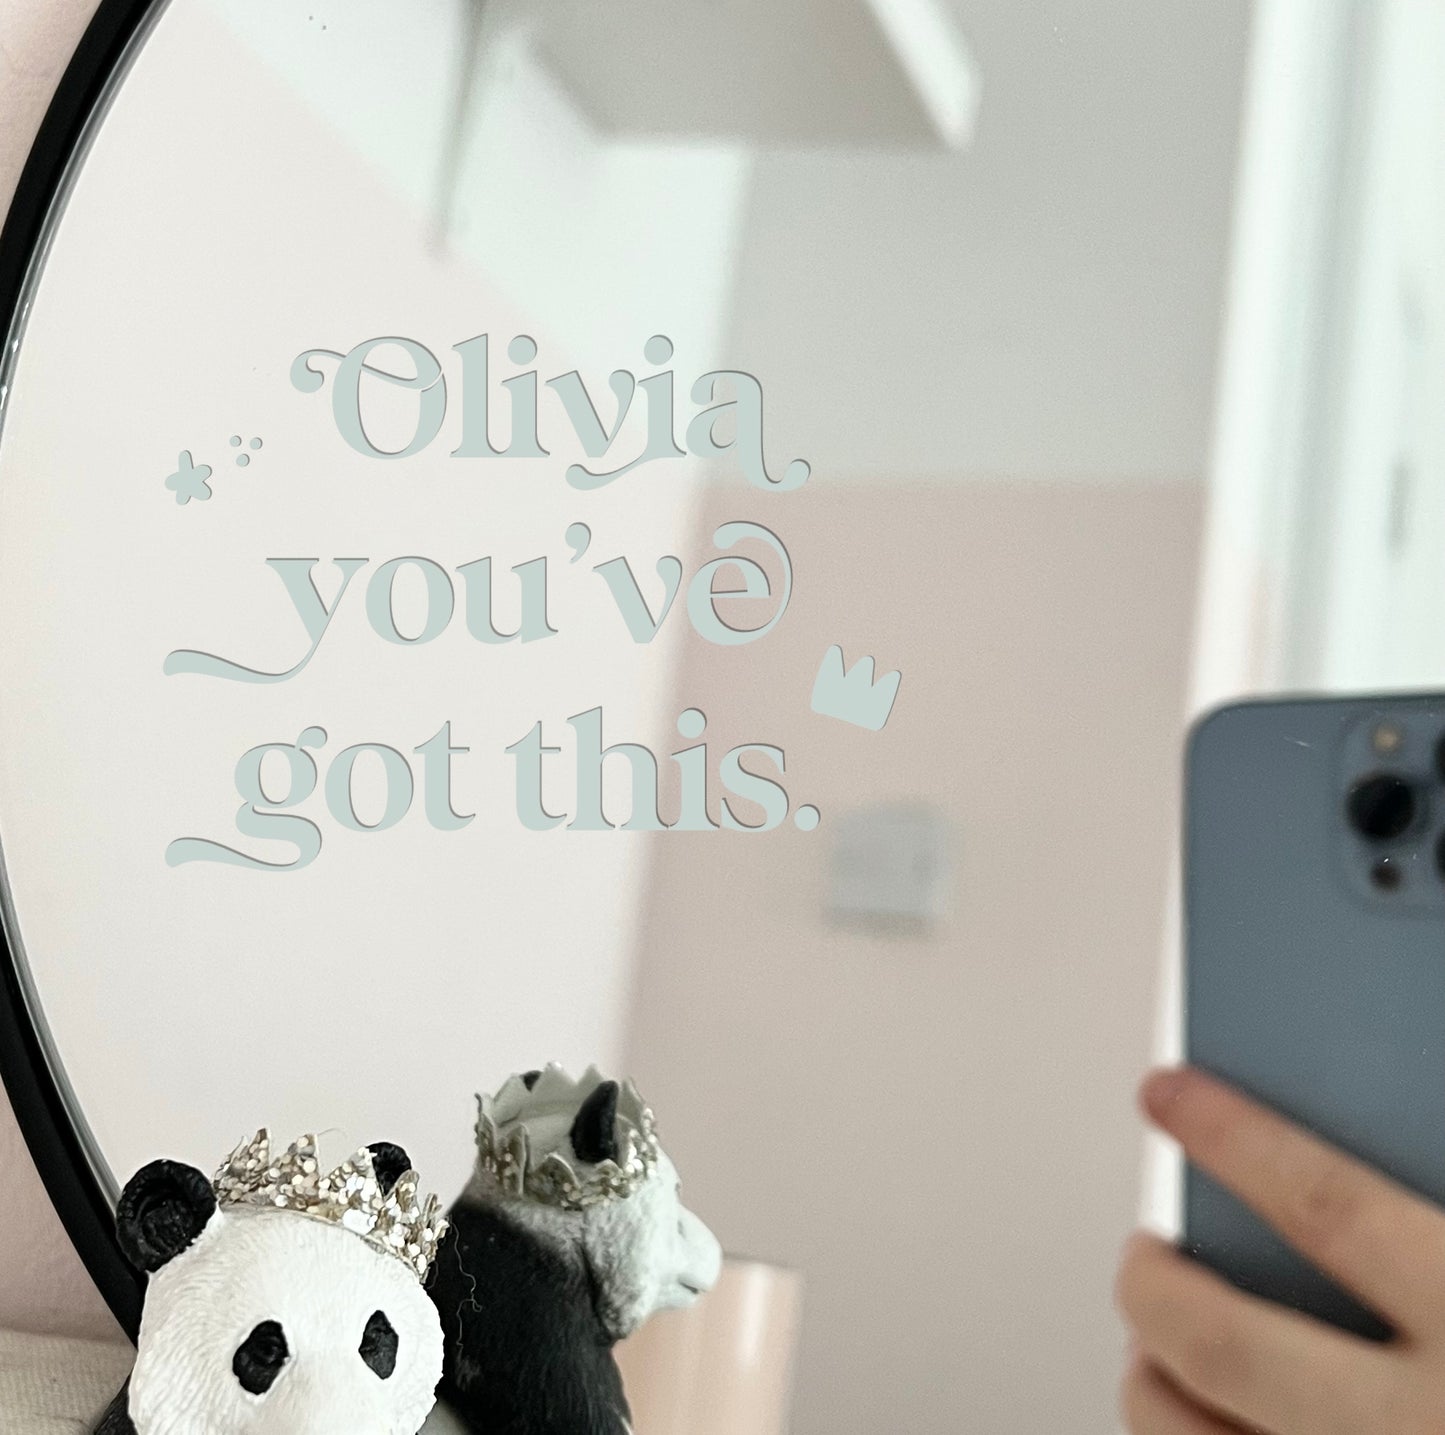 Mirror decal vinyl ✨ - personalised with any wording you would like! Motivational sticker